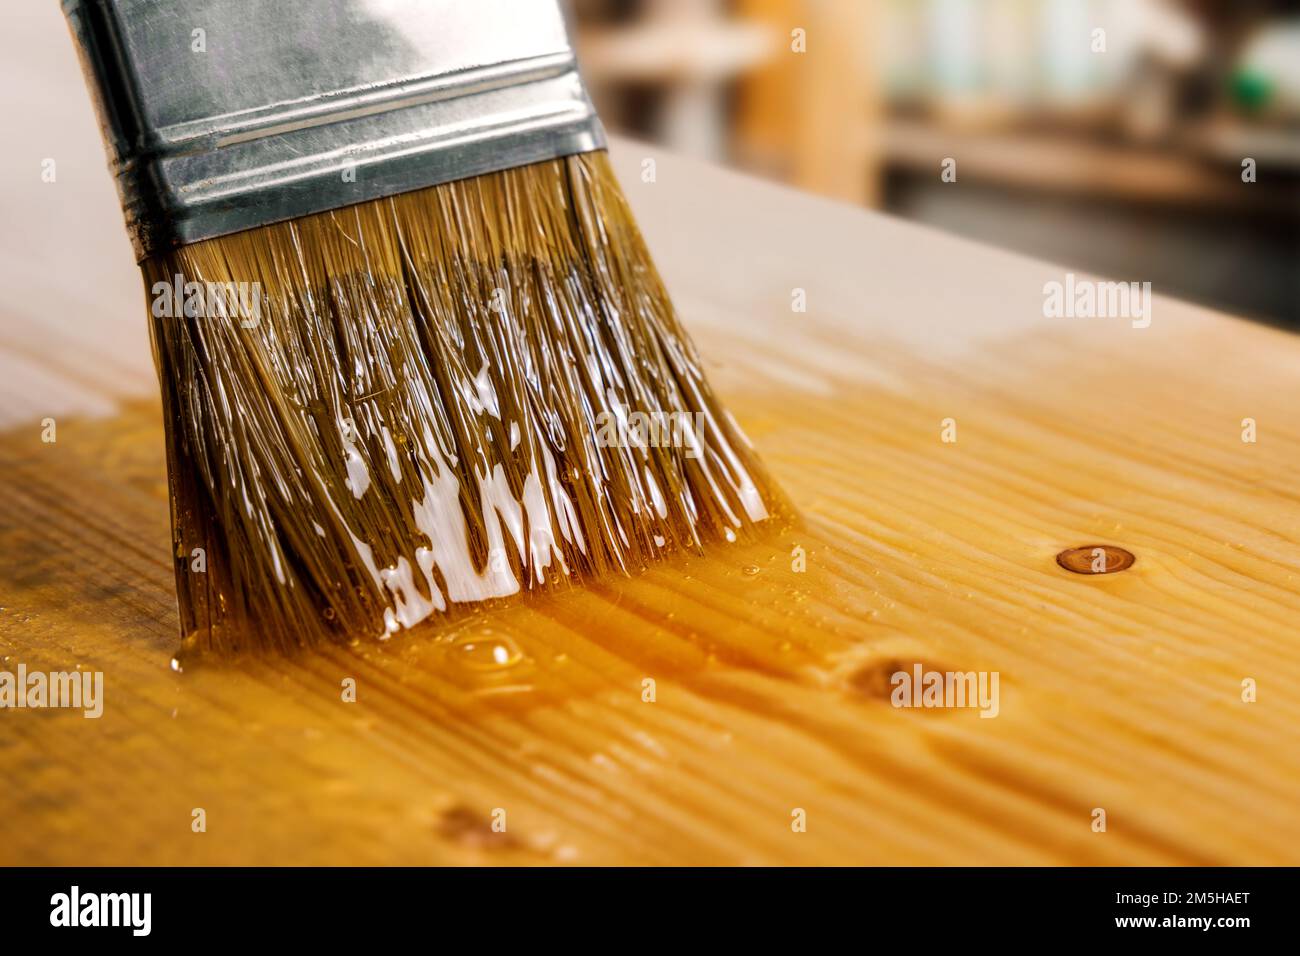 applying varnish on wooden board with paint brush. furniture coating and protection Stock Photo